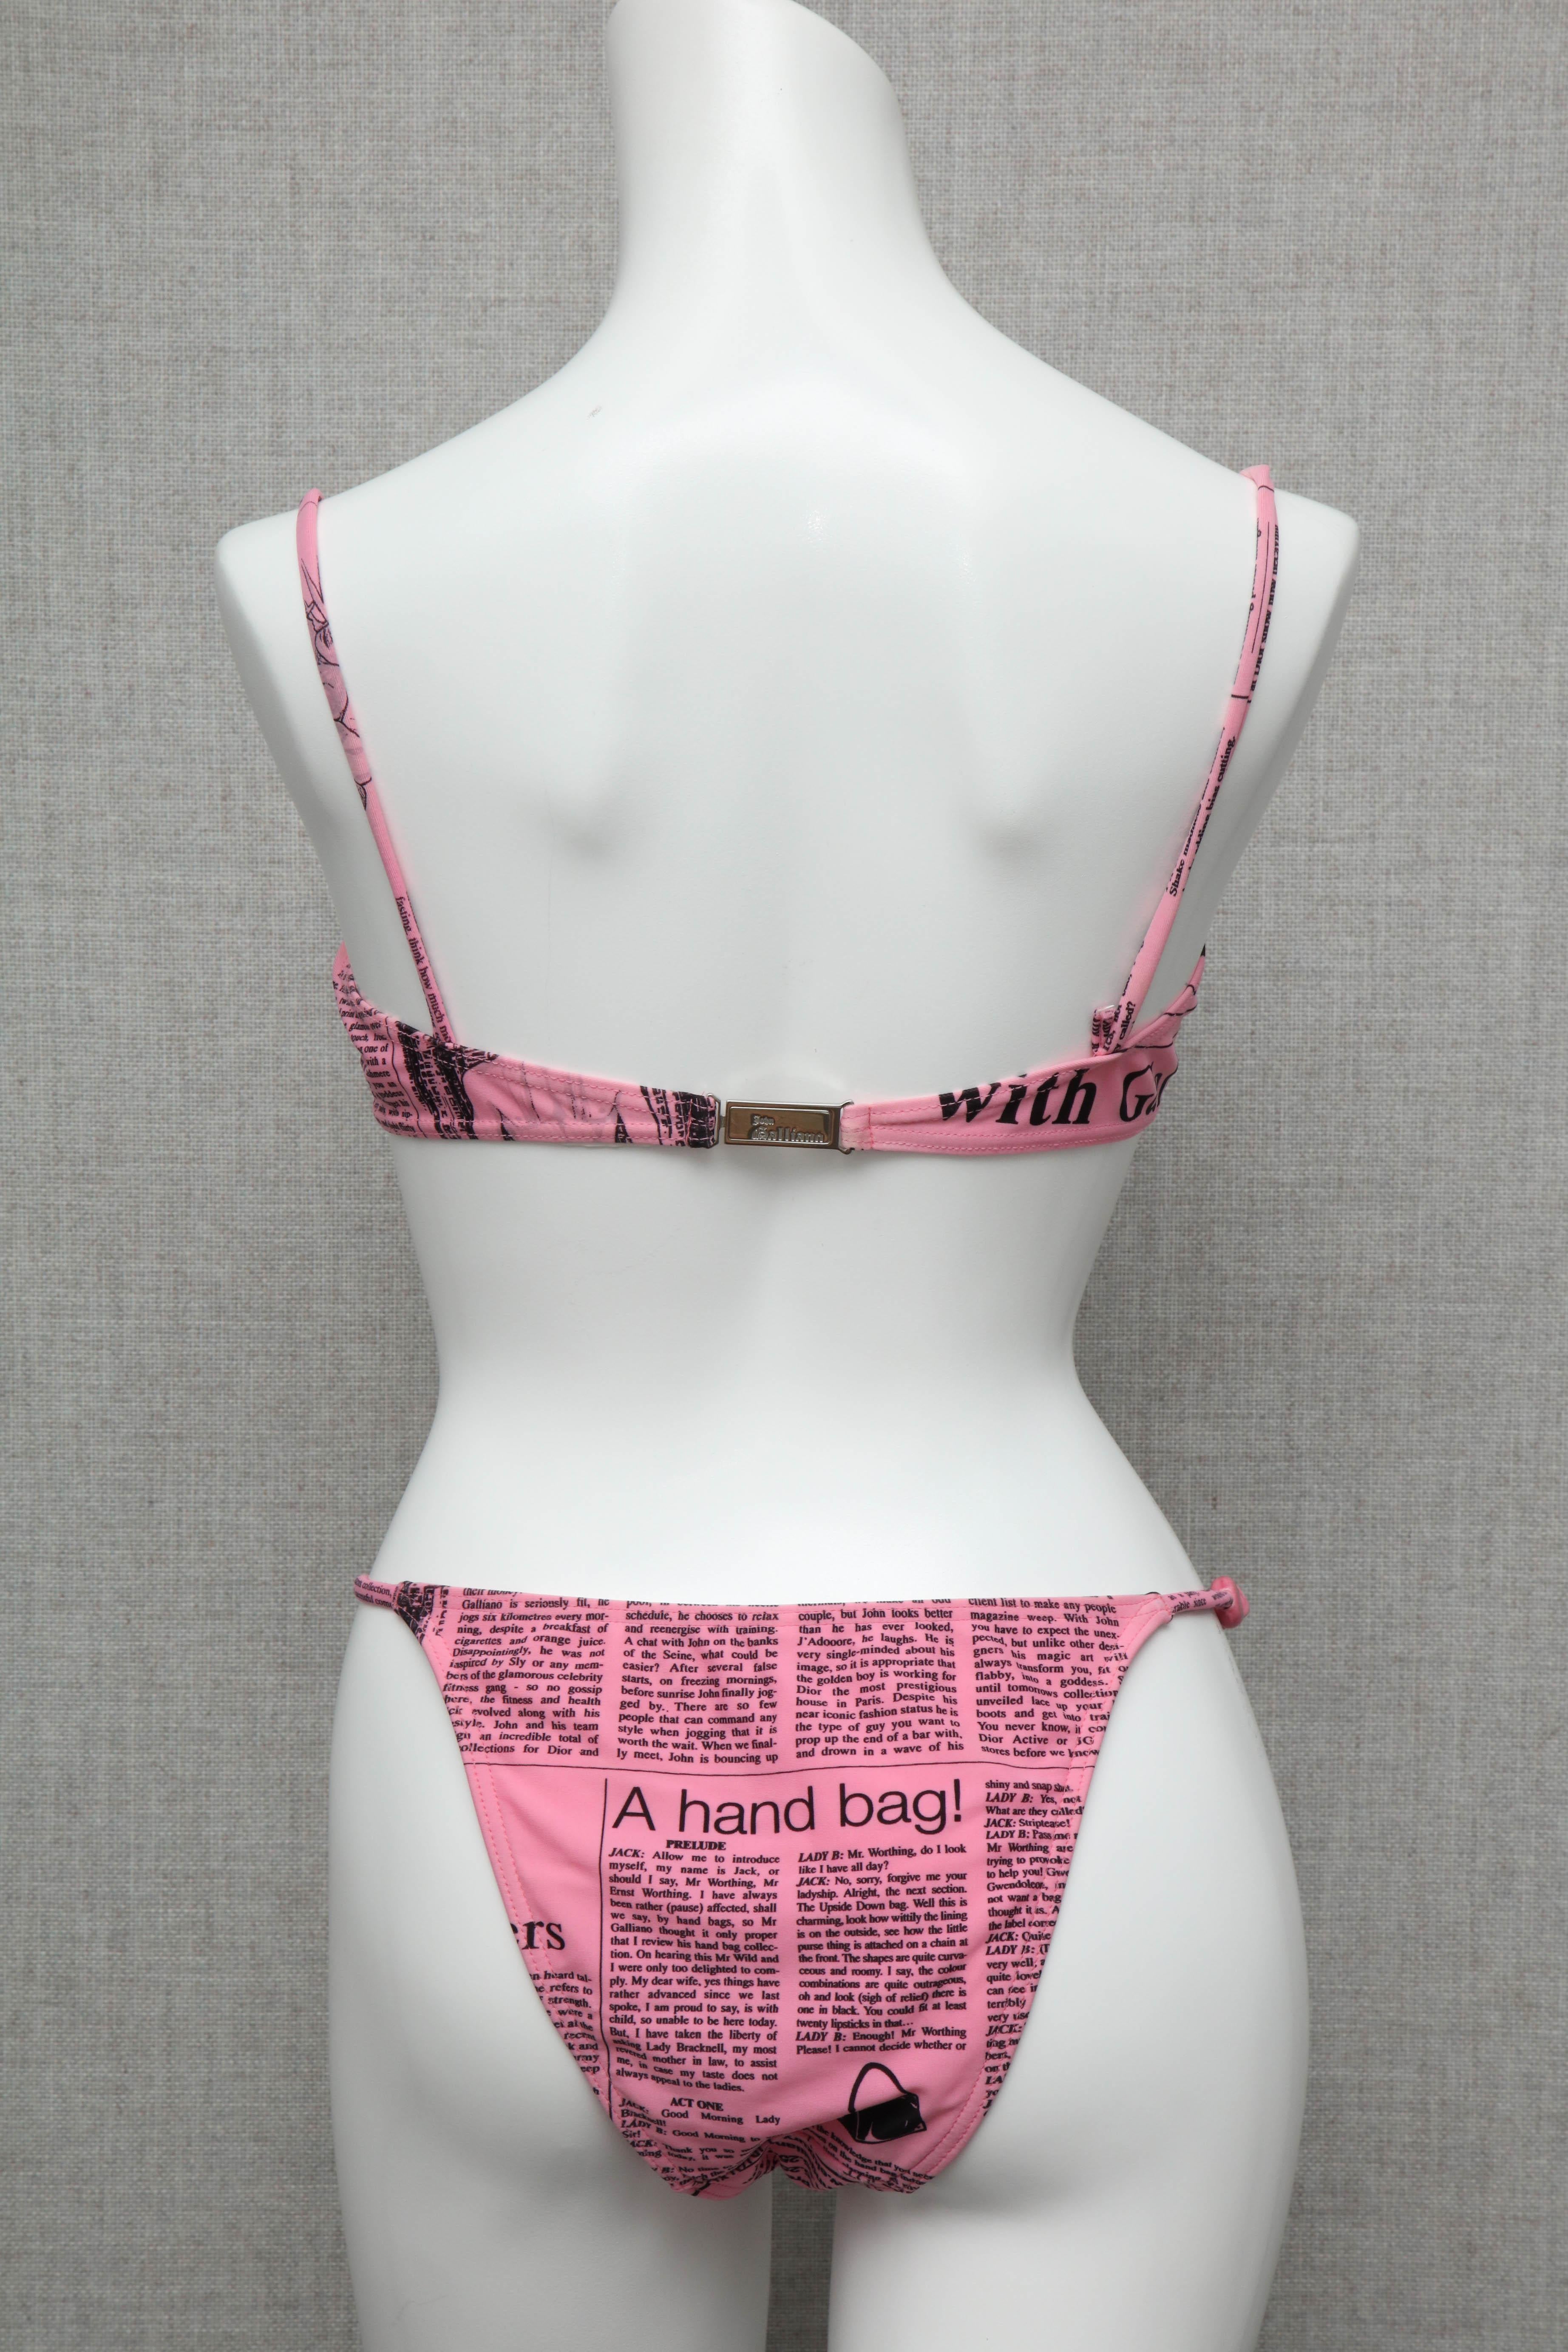 John Galliano Extremely Rare Iconic Pink Newspaper Print Bikini In Good Condition For Sale In Chicago, IL